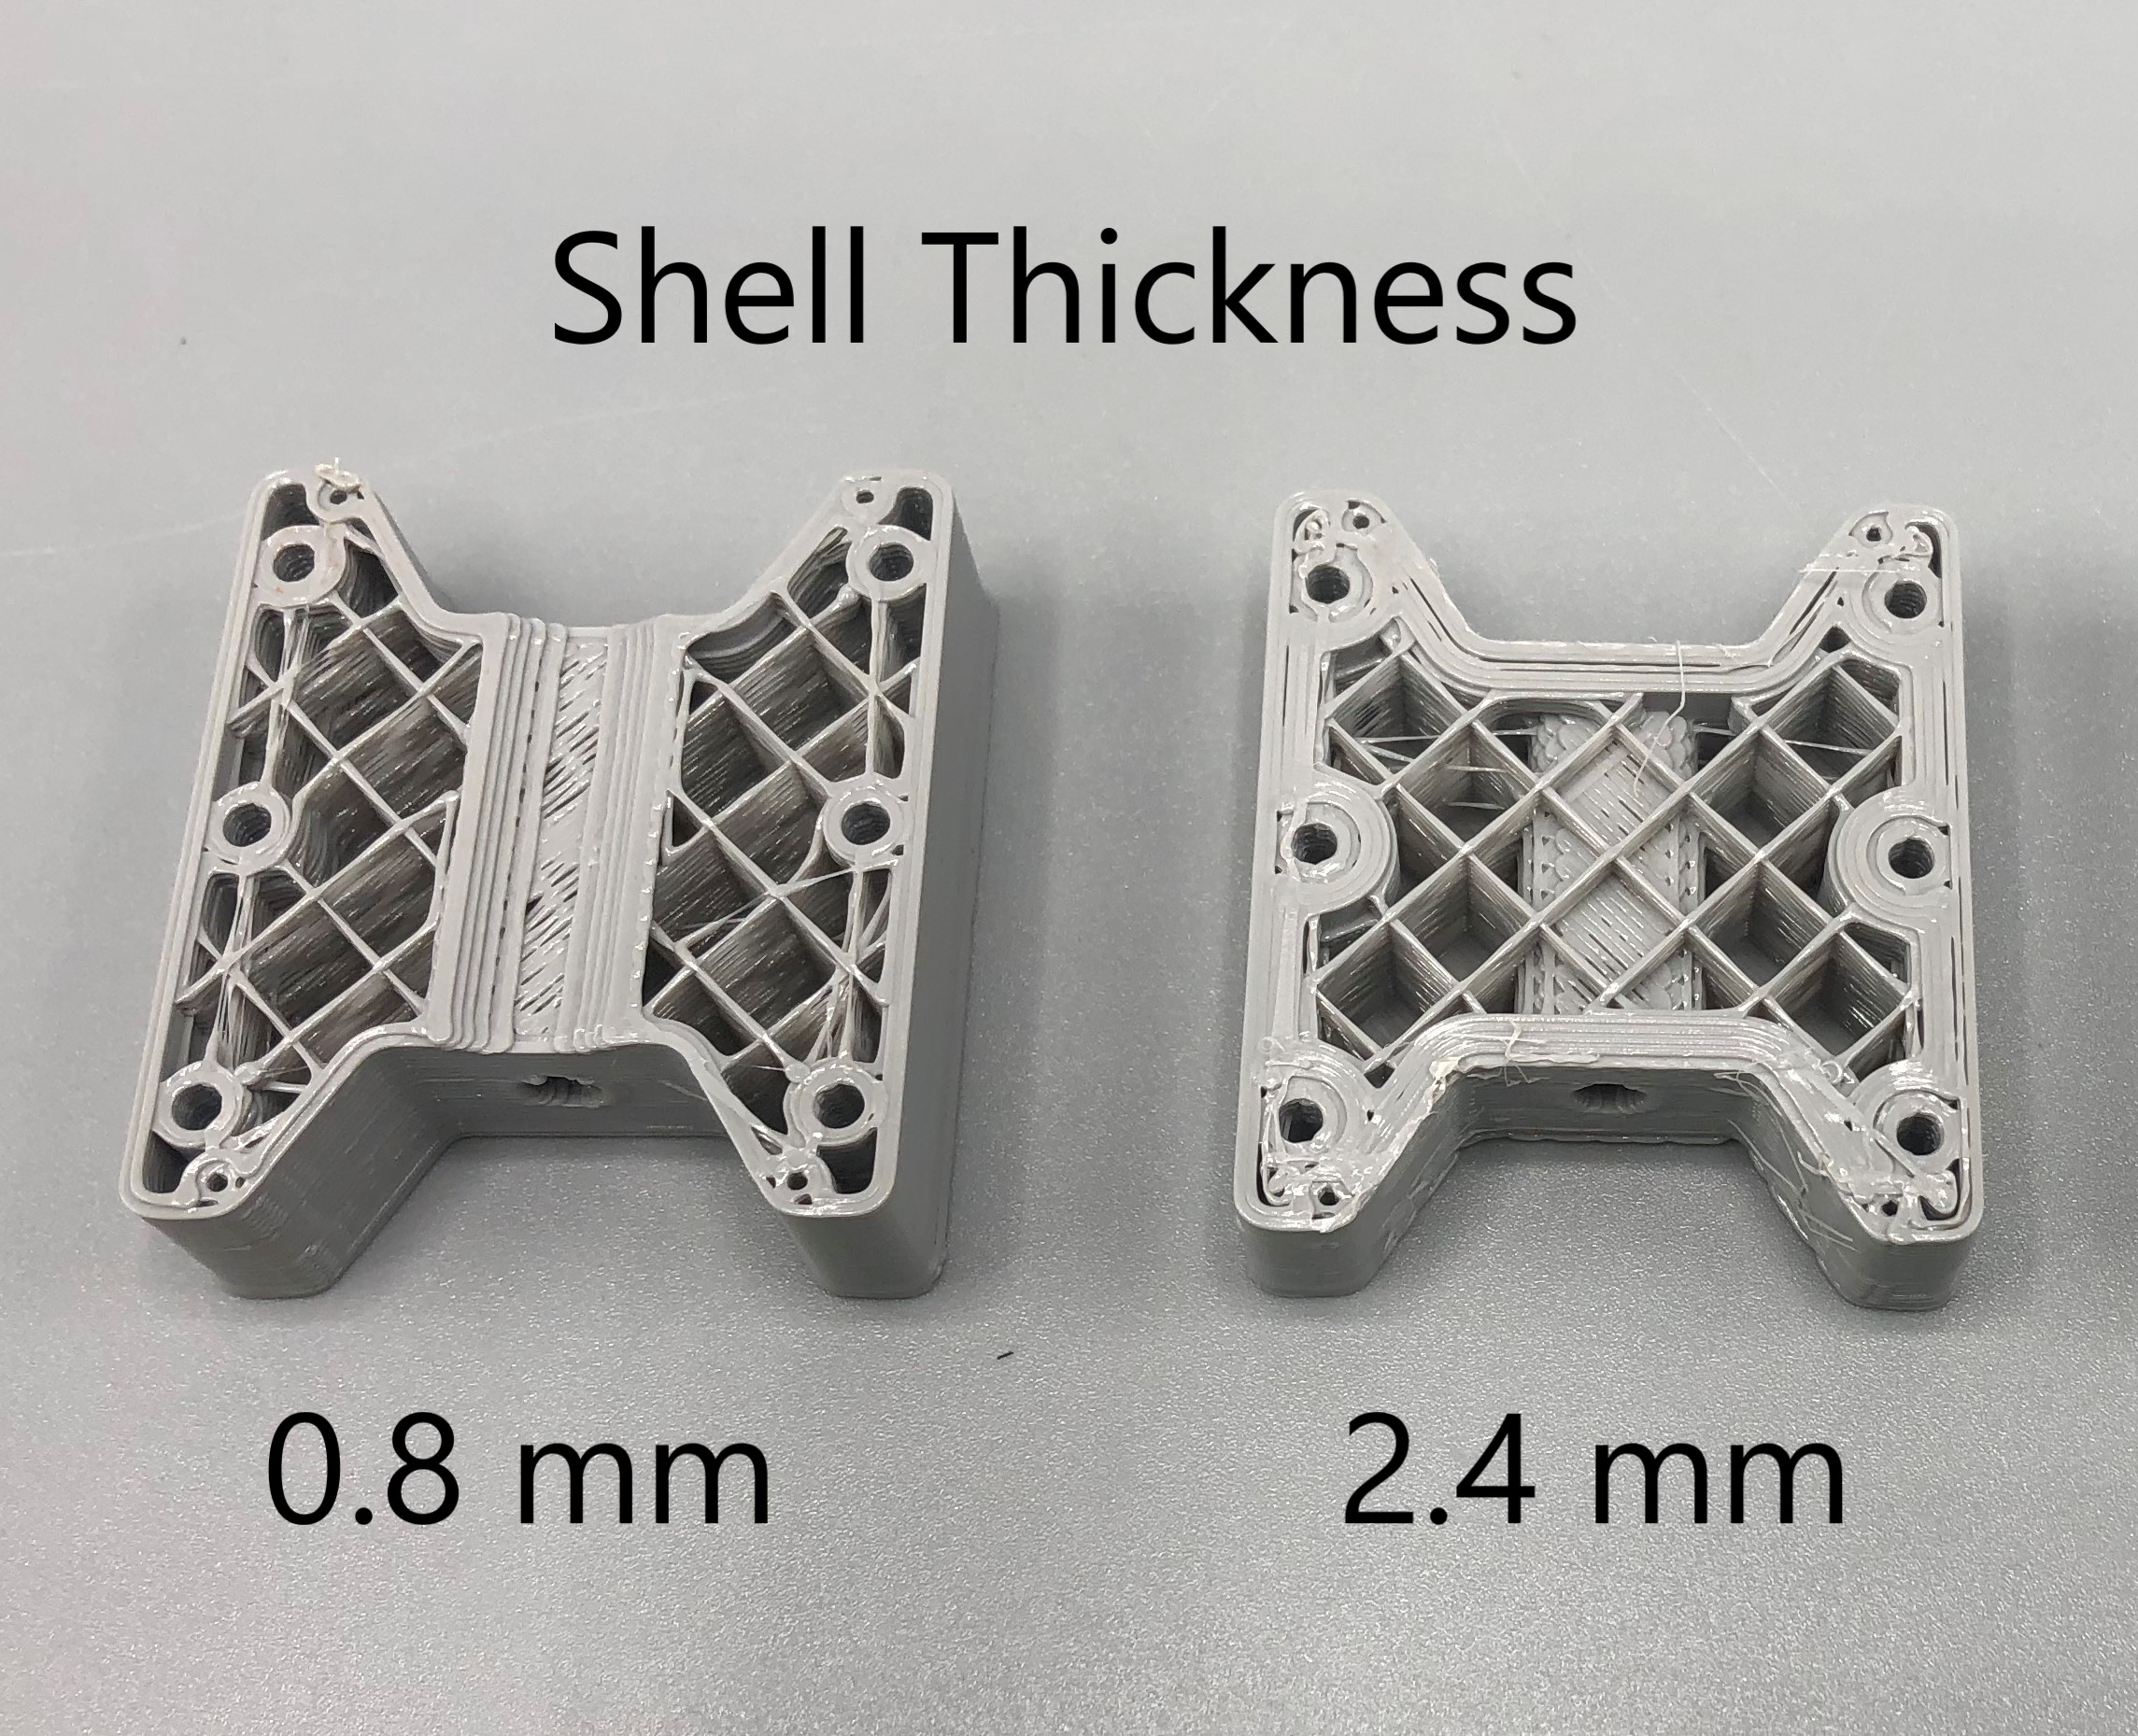 Optimizing Strength Of 3d Printed Parts 3dpros